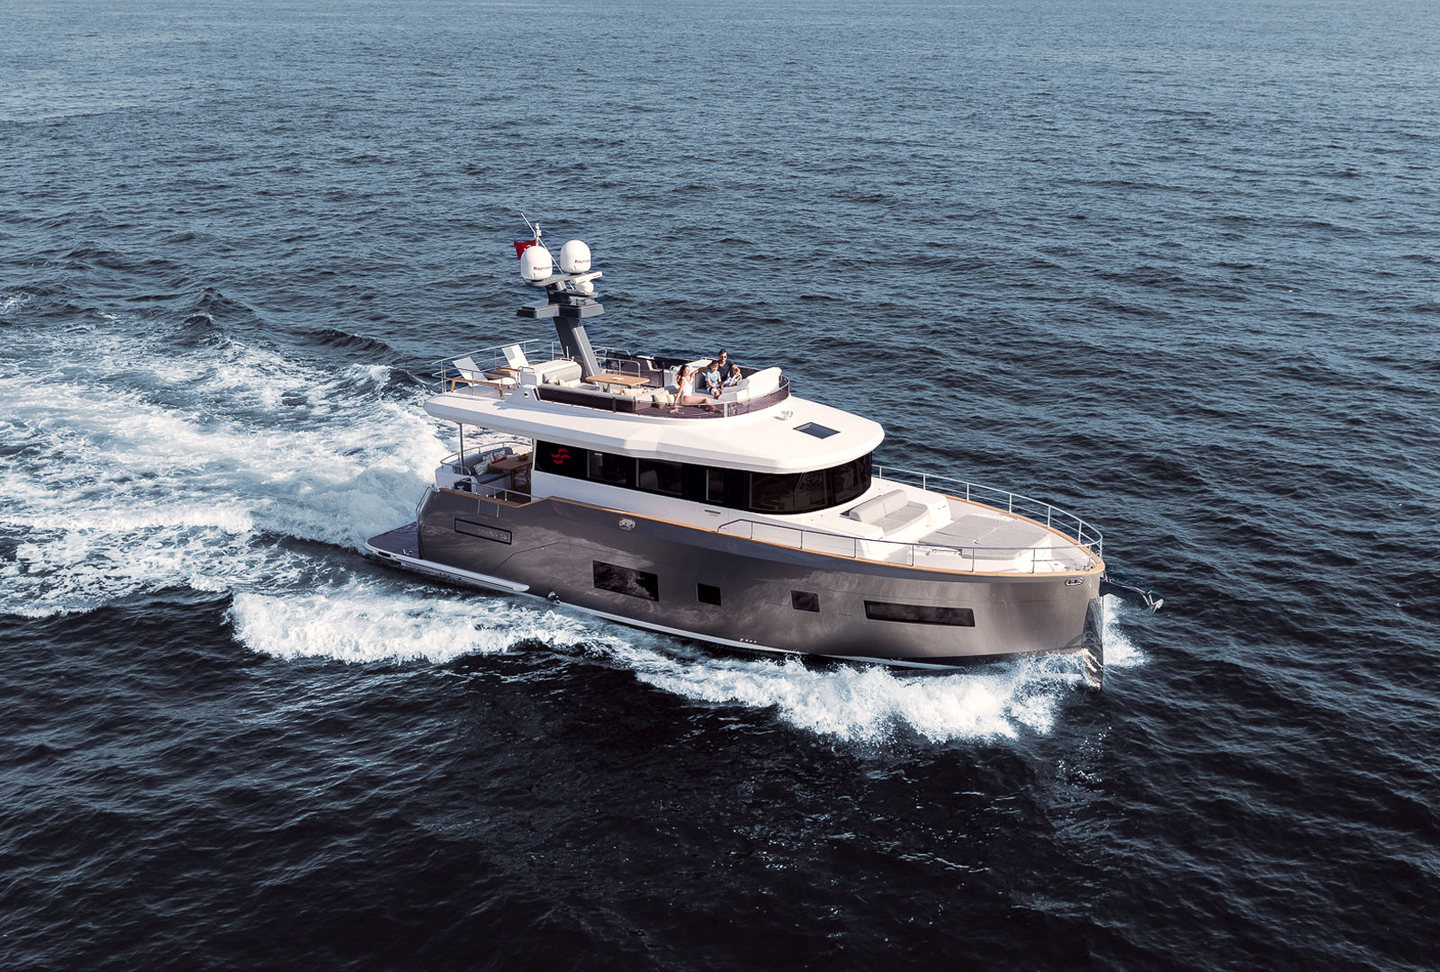 360 VR Virtual Tours of the Sirena 58